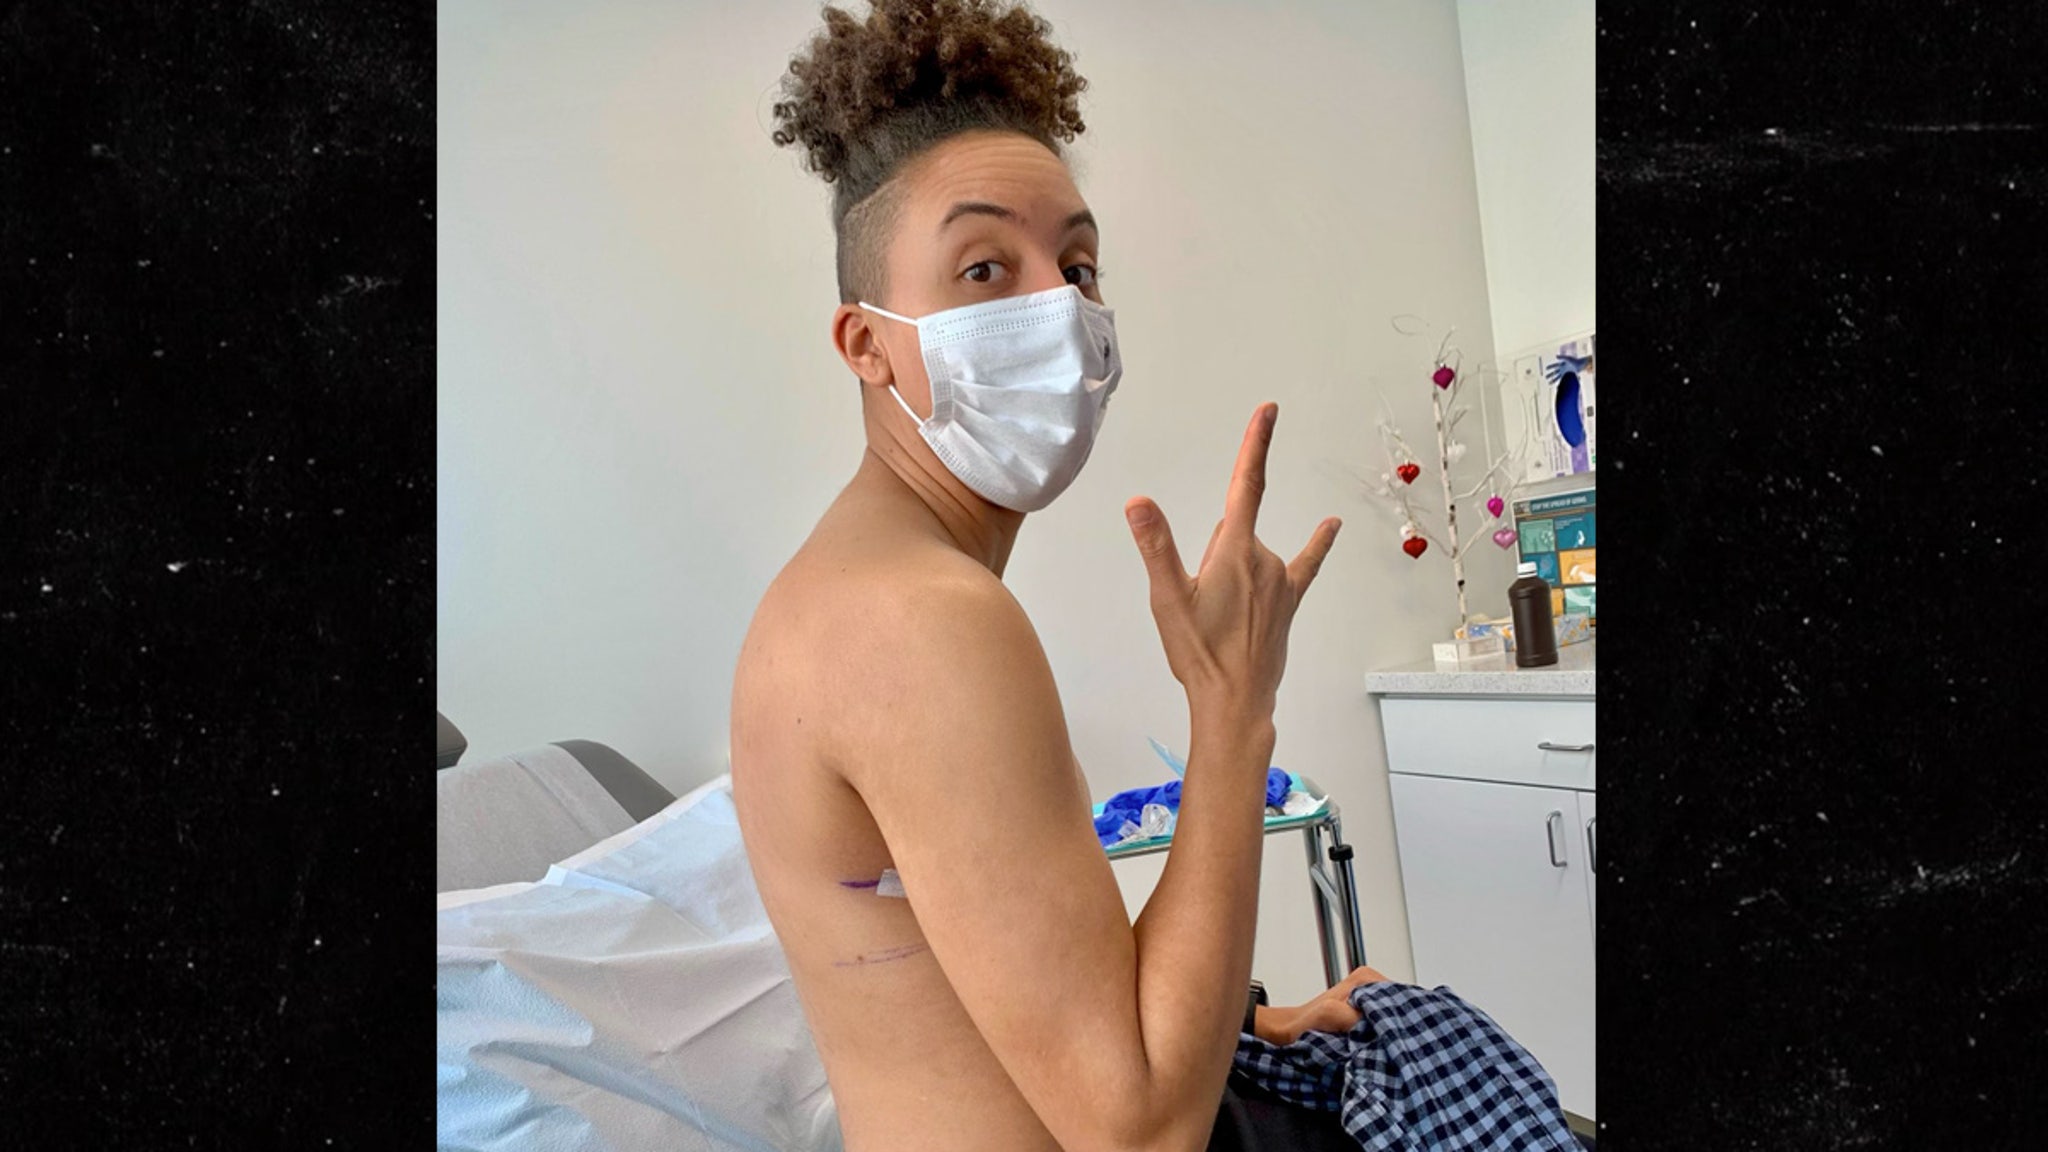 WNBA’s Layshia Clarendon undergoes breast removal surgery and hopes to inspire trans athletes